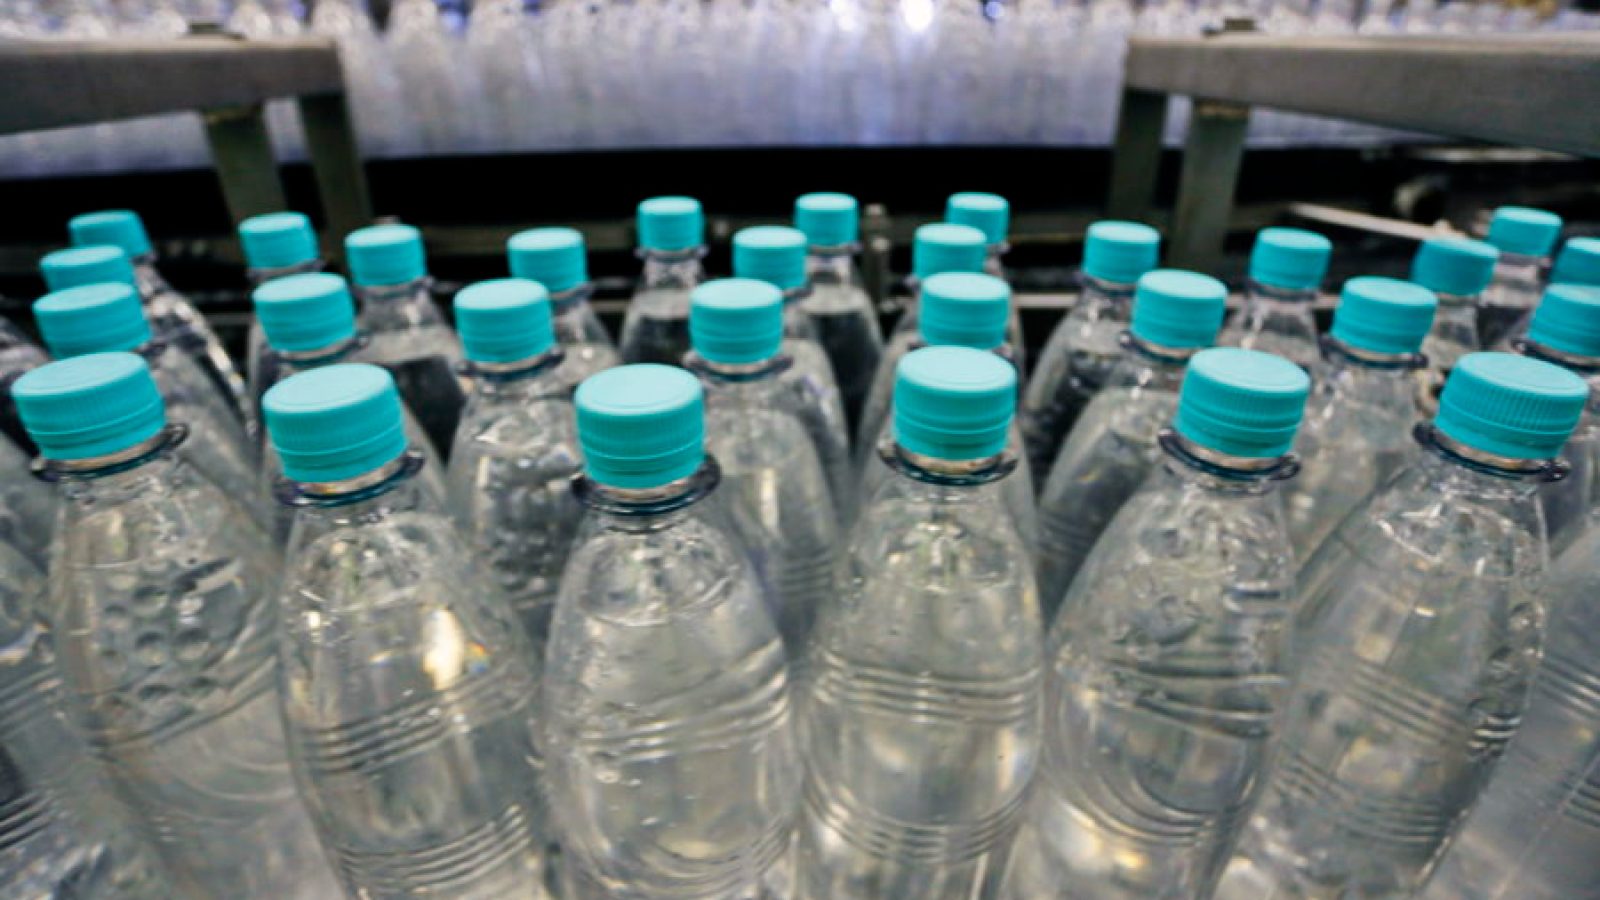 What to know about the recall on bottled water because of moldHelloGiggles